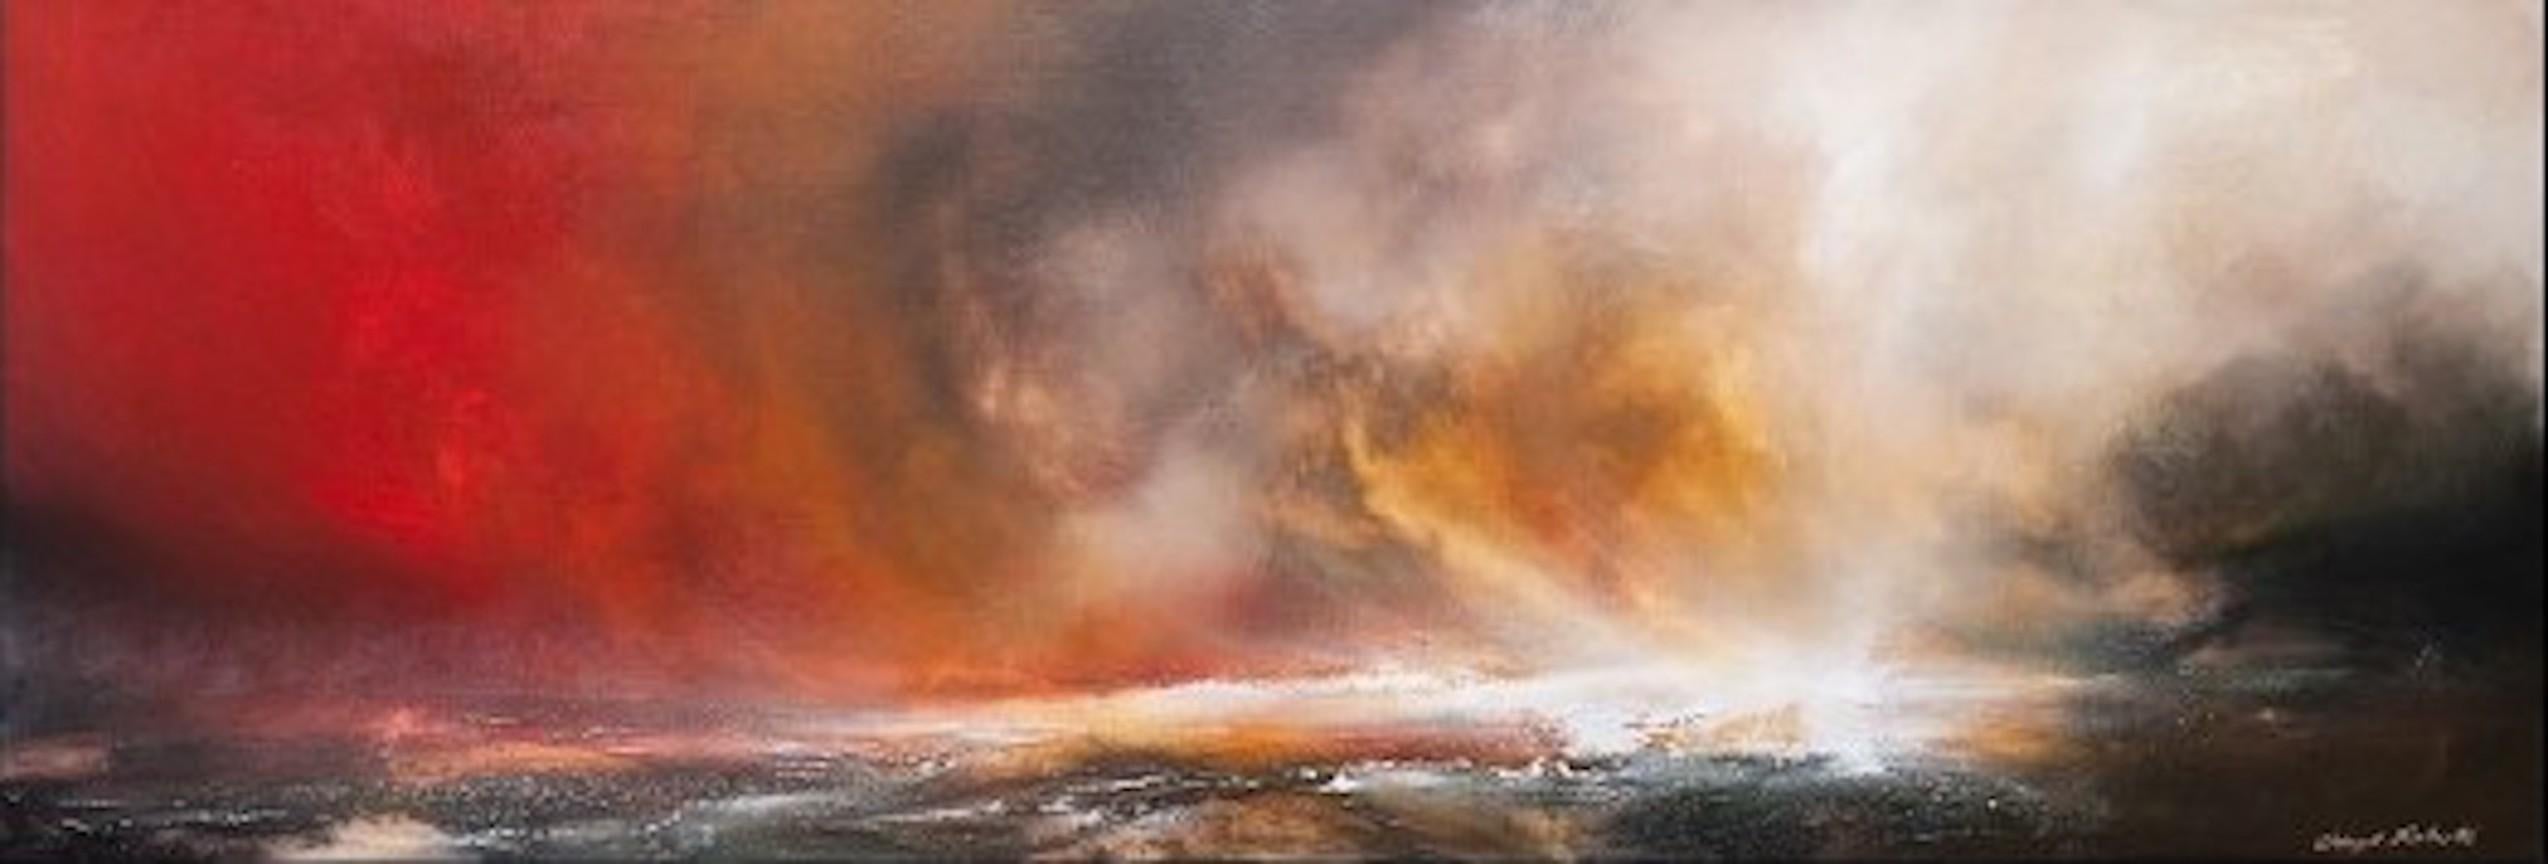 The Royal Storm By Sheryl Roberts [2021]
Original
Oil and acrylic
Image size: H:40 cm x W:120 cm
Complete Size of Unframed Work: H:40 cm x W:120 cm x D:5cm
Framed Size: H:53 cm x W:133 cm x D:5cm
Sold Framed
Please note that insitu images are purely